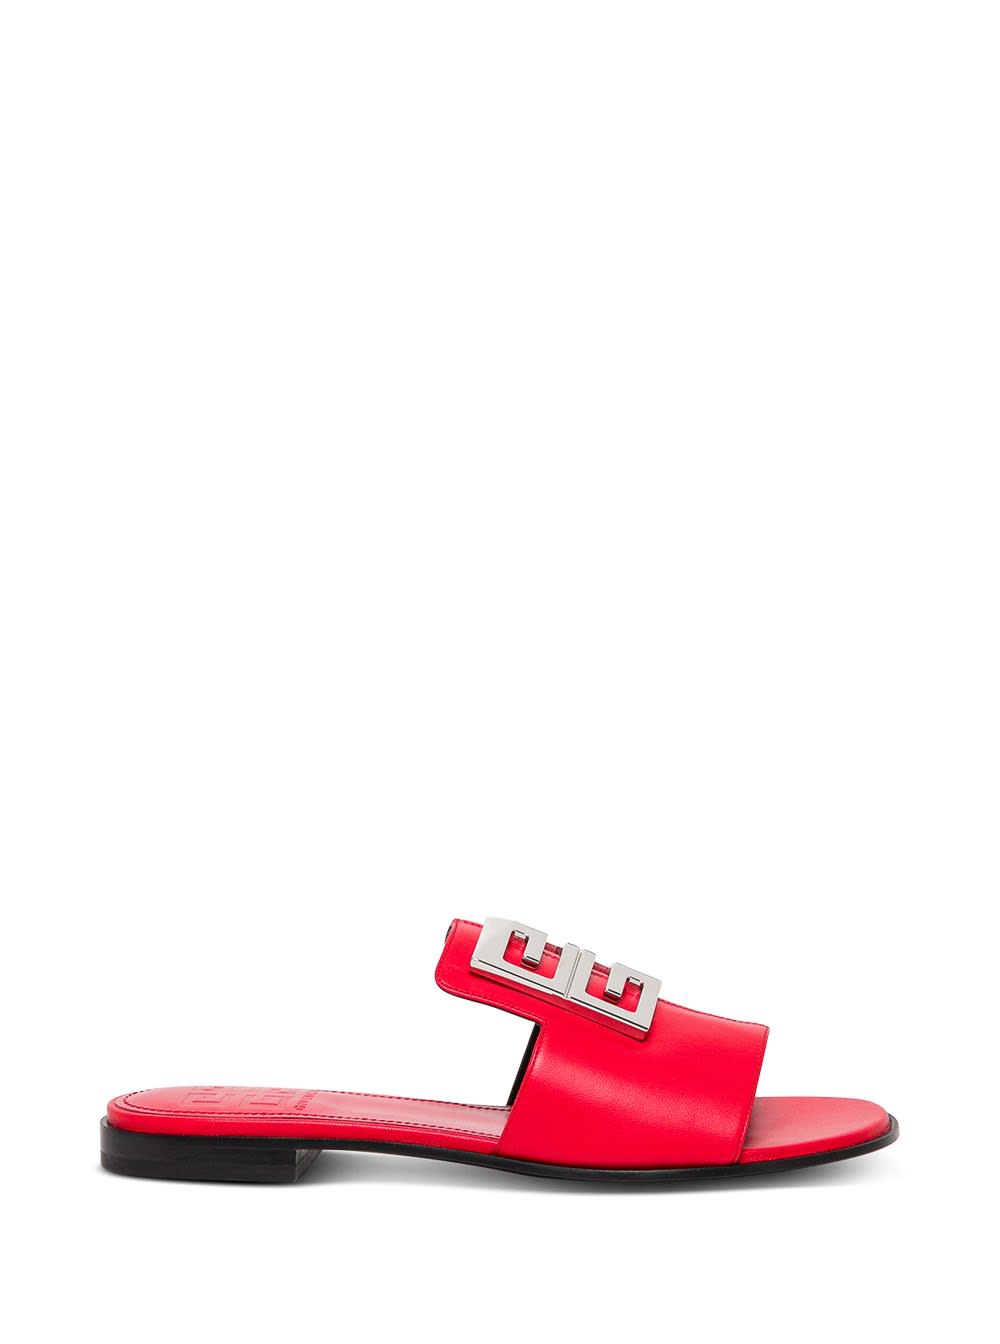 Givenchy 4g Flat Sandals In Red Leather